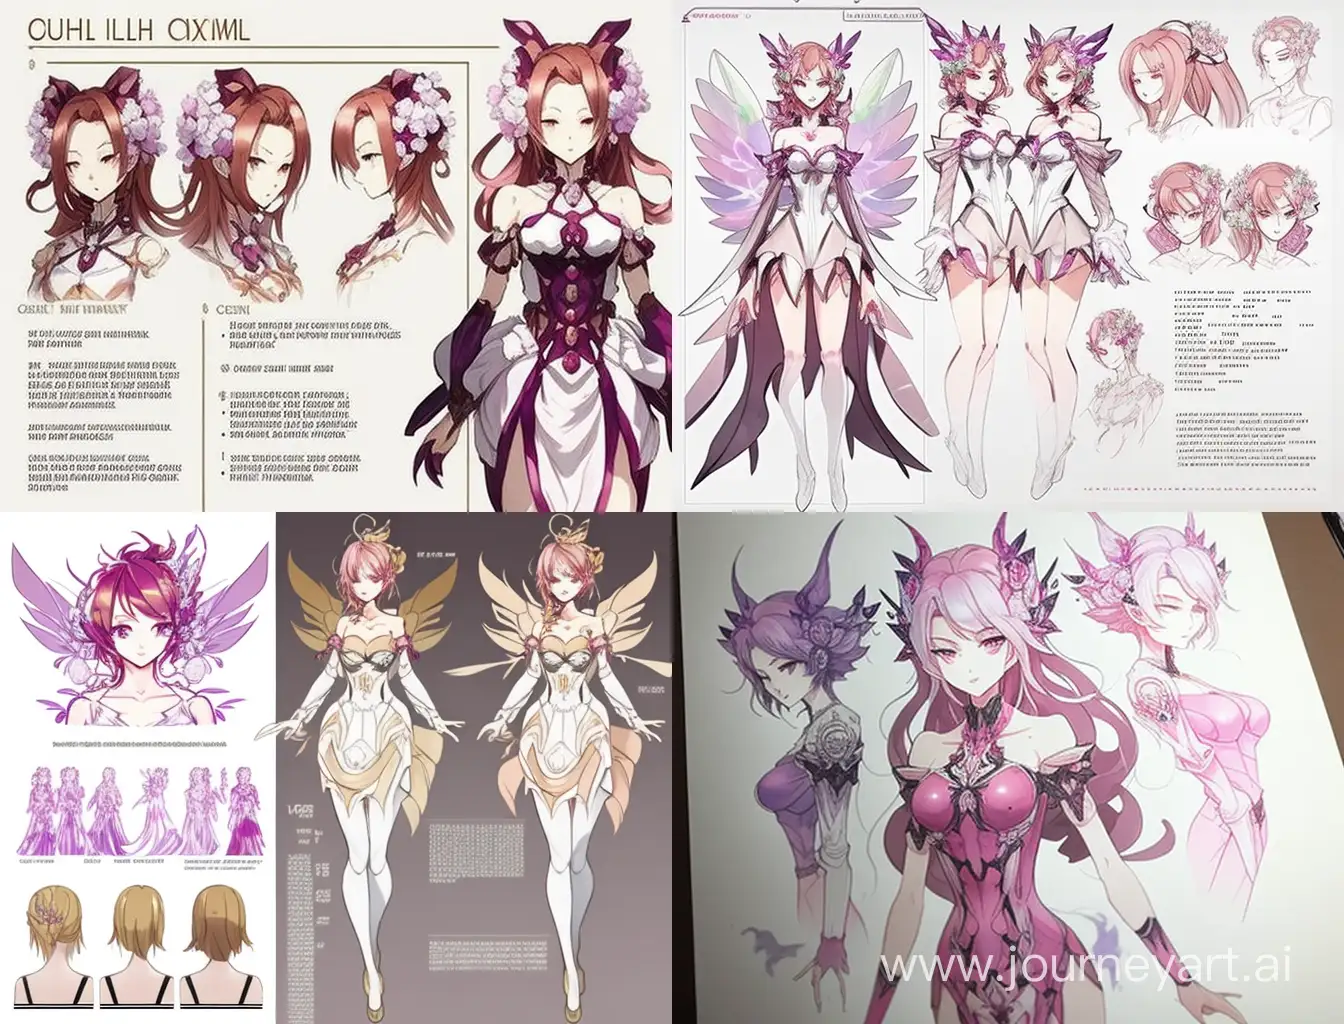 Made in a good-looking creative art style, semi-realism, or anime. With fantasy motifs. Create an OC with : pink, purple, white color pallet. She has one body, but three twin heads sharing one neck, like Siamese twins, tall, wears a semi-transparent shiny dress with many prints in the shape of spirits-like faces at the end. One head has pink hair, the second head has white hair, the third head has purple hair.